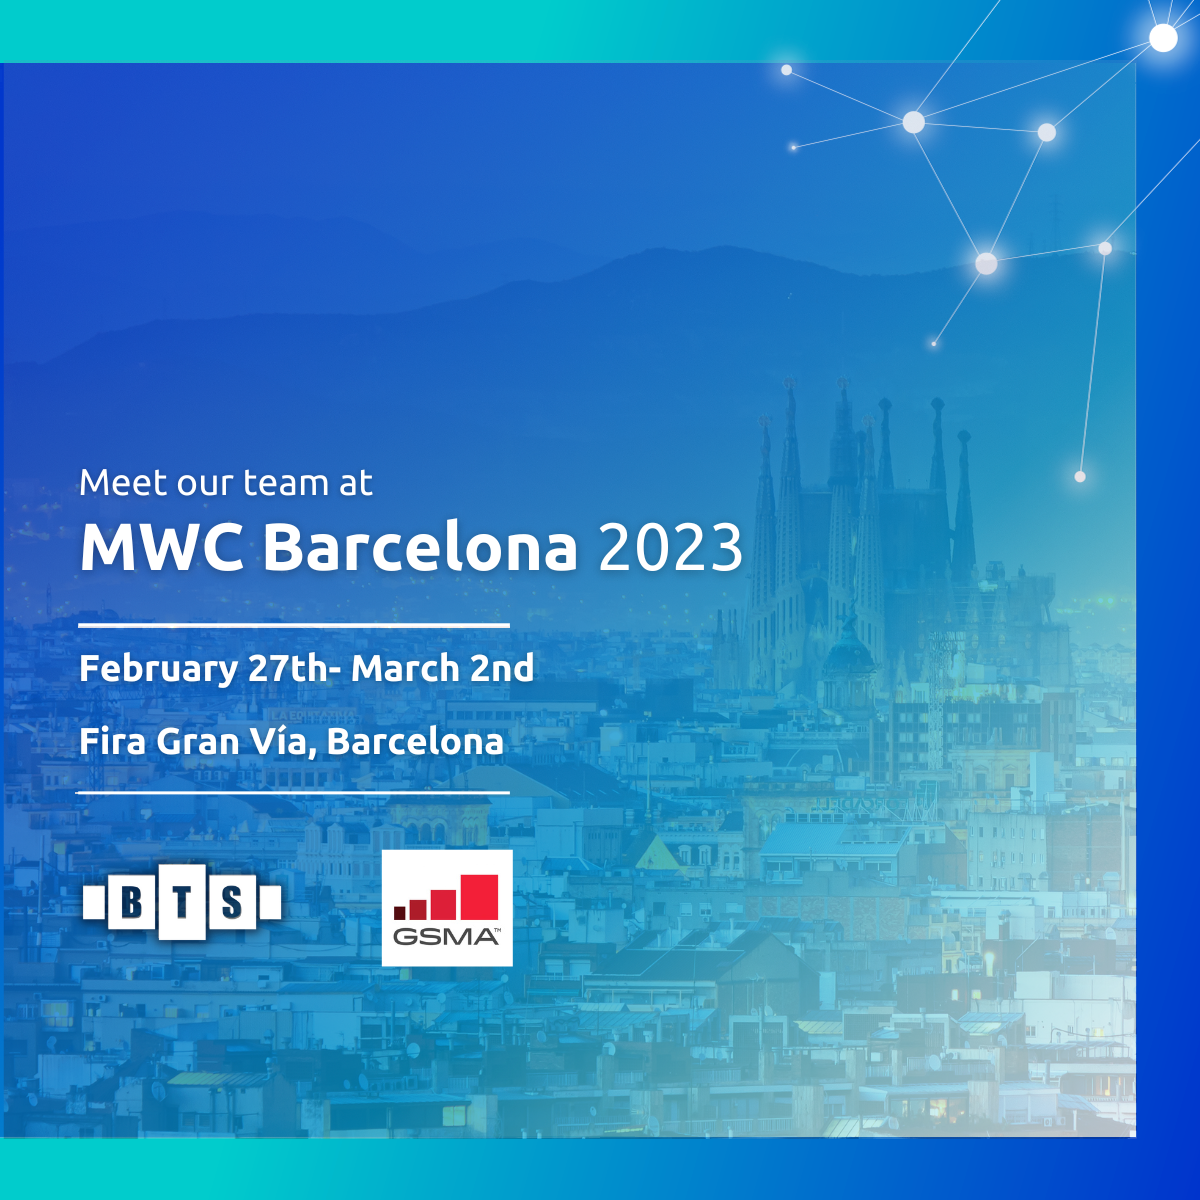 Information about MWC Barcelona 2023